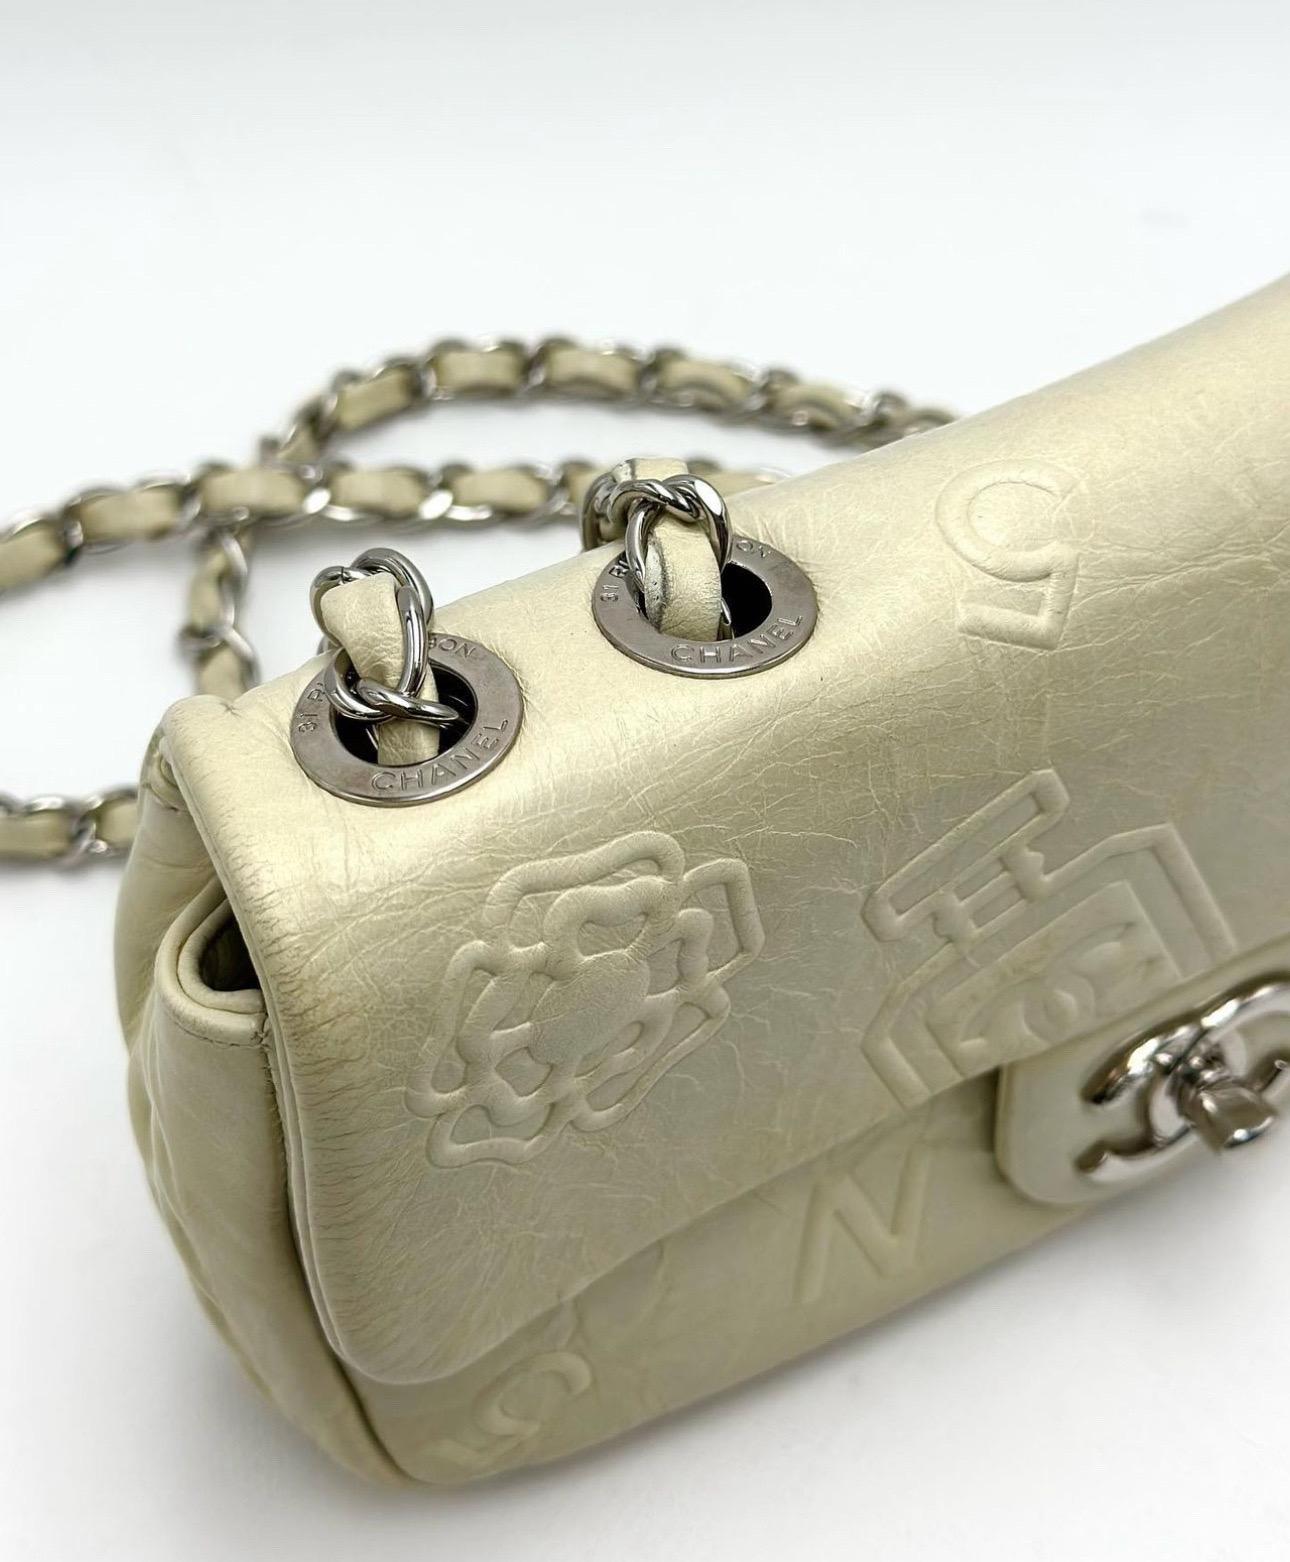 Chanel White Embossed Leather Precious Symbols Small Flap Bag For Sale 13